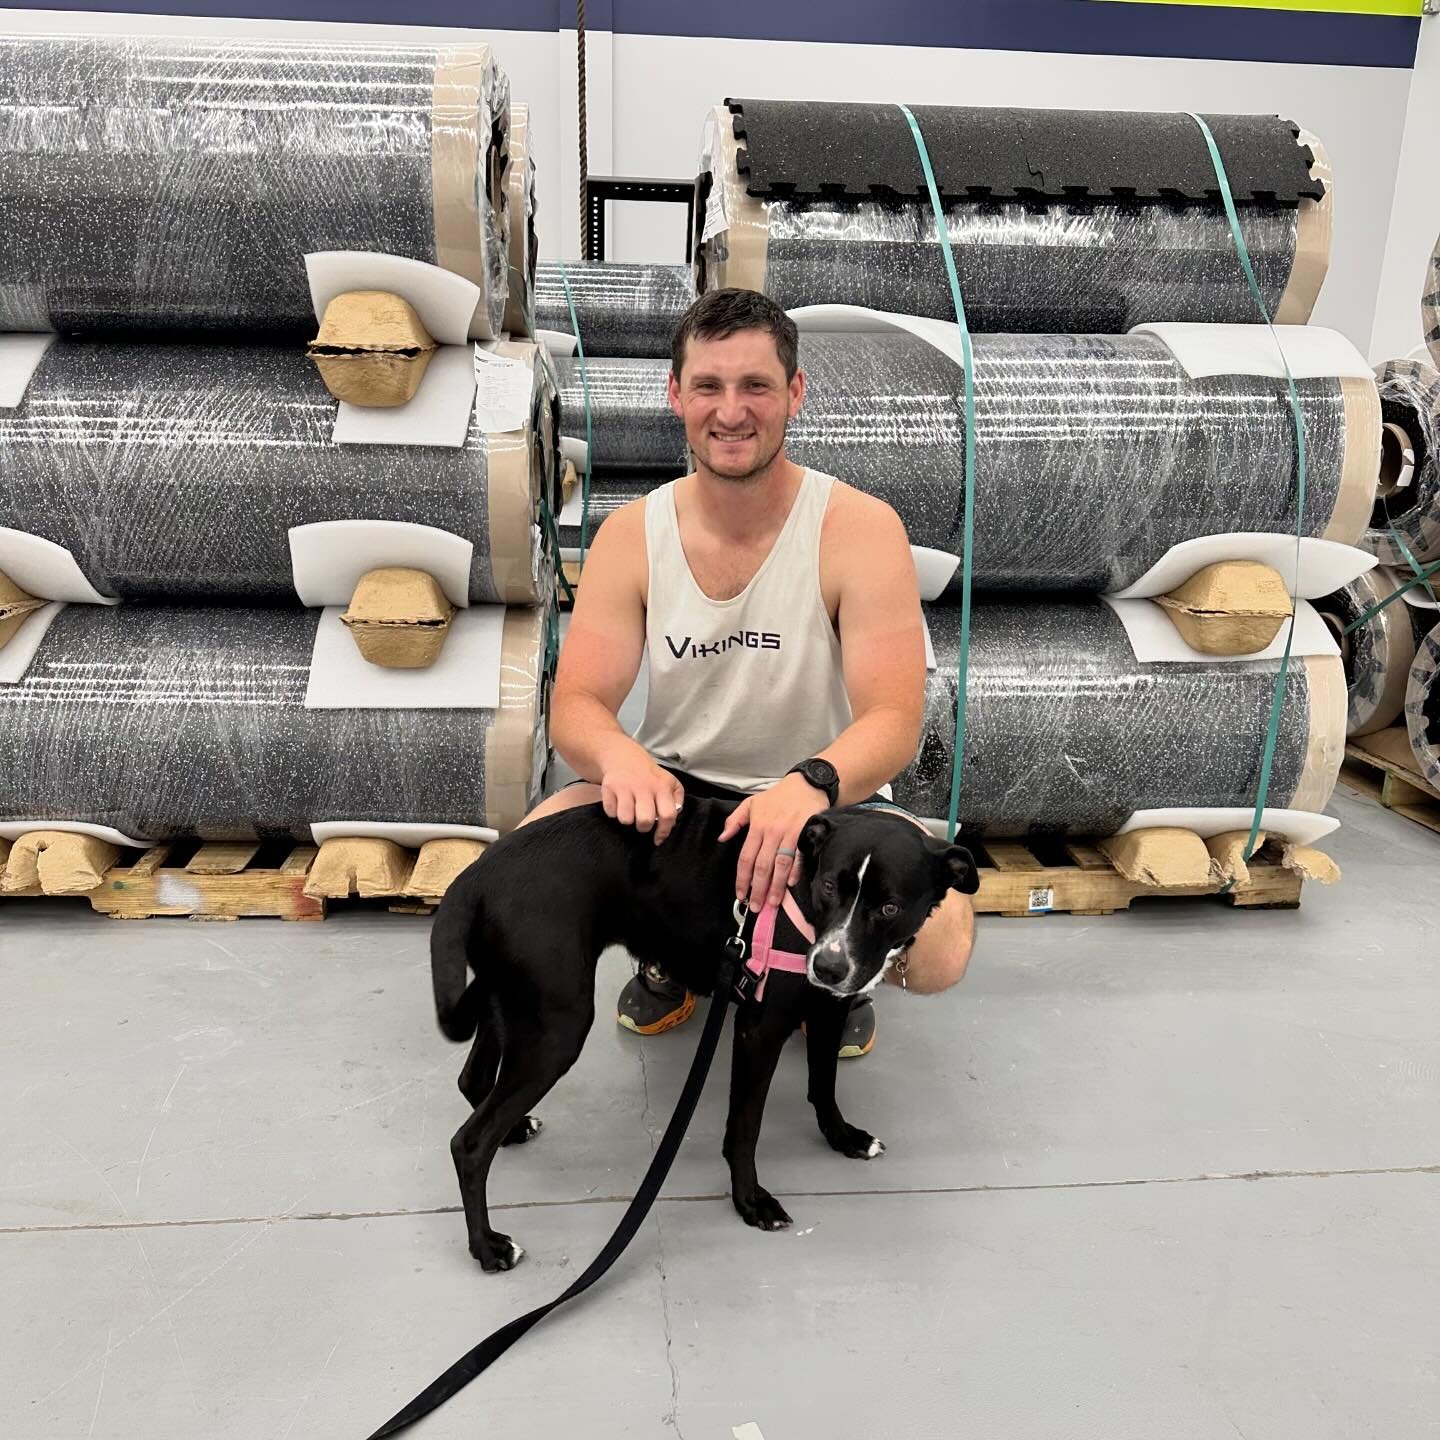 Coach Walker and Coach Frank are getting ready to start laying flooring in the new gym space and they need YOUR help! (Jersey can&rsquo;t help because she does not have thumbs.) 

We&rsquo;ll be starting at 6pm on Monday and coming back at 4pm on Tue